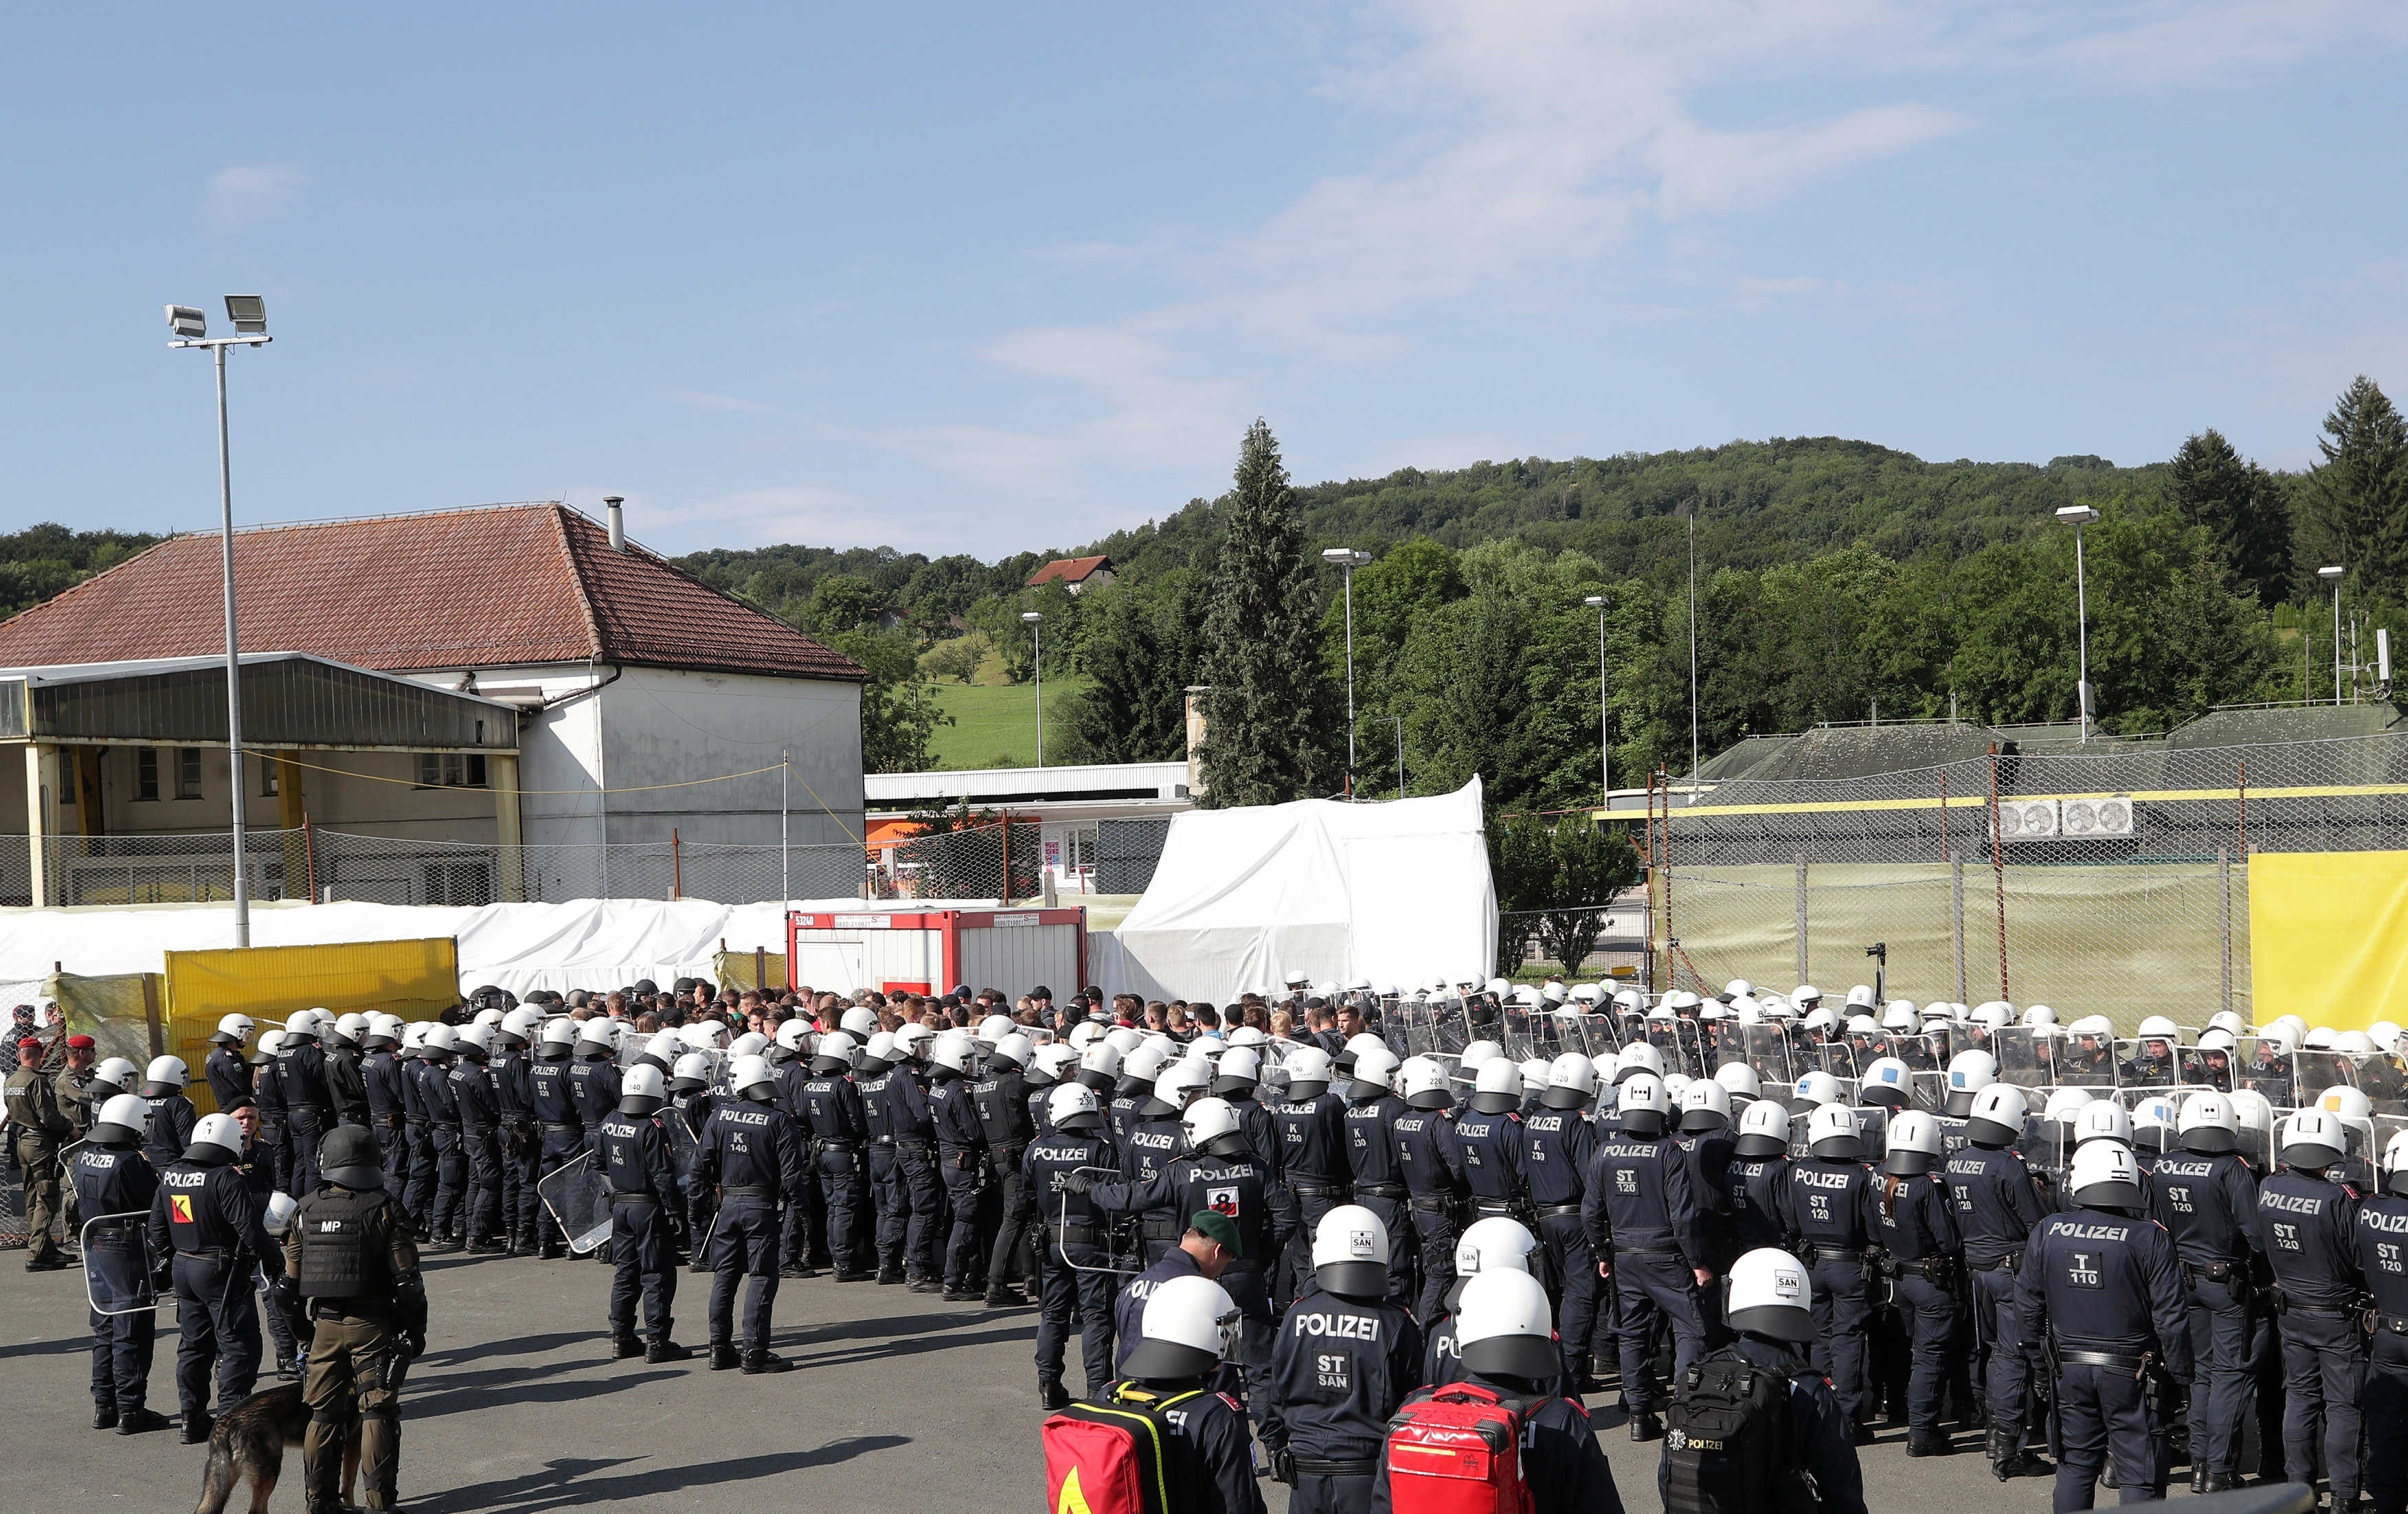 Austria deploys police and troops for immigration exercise on border